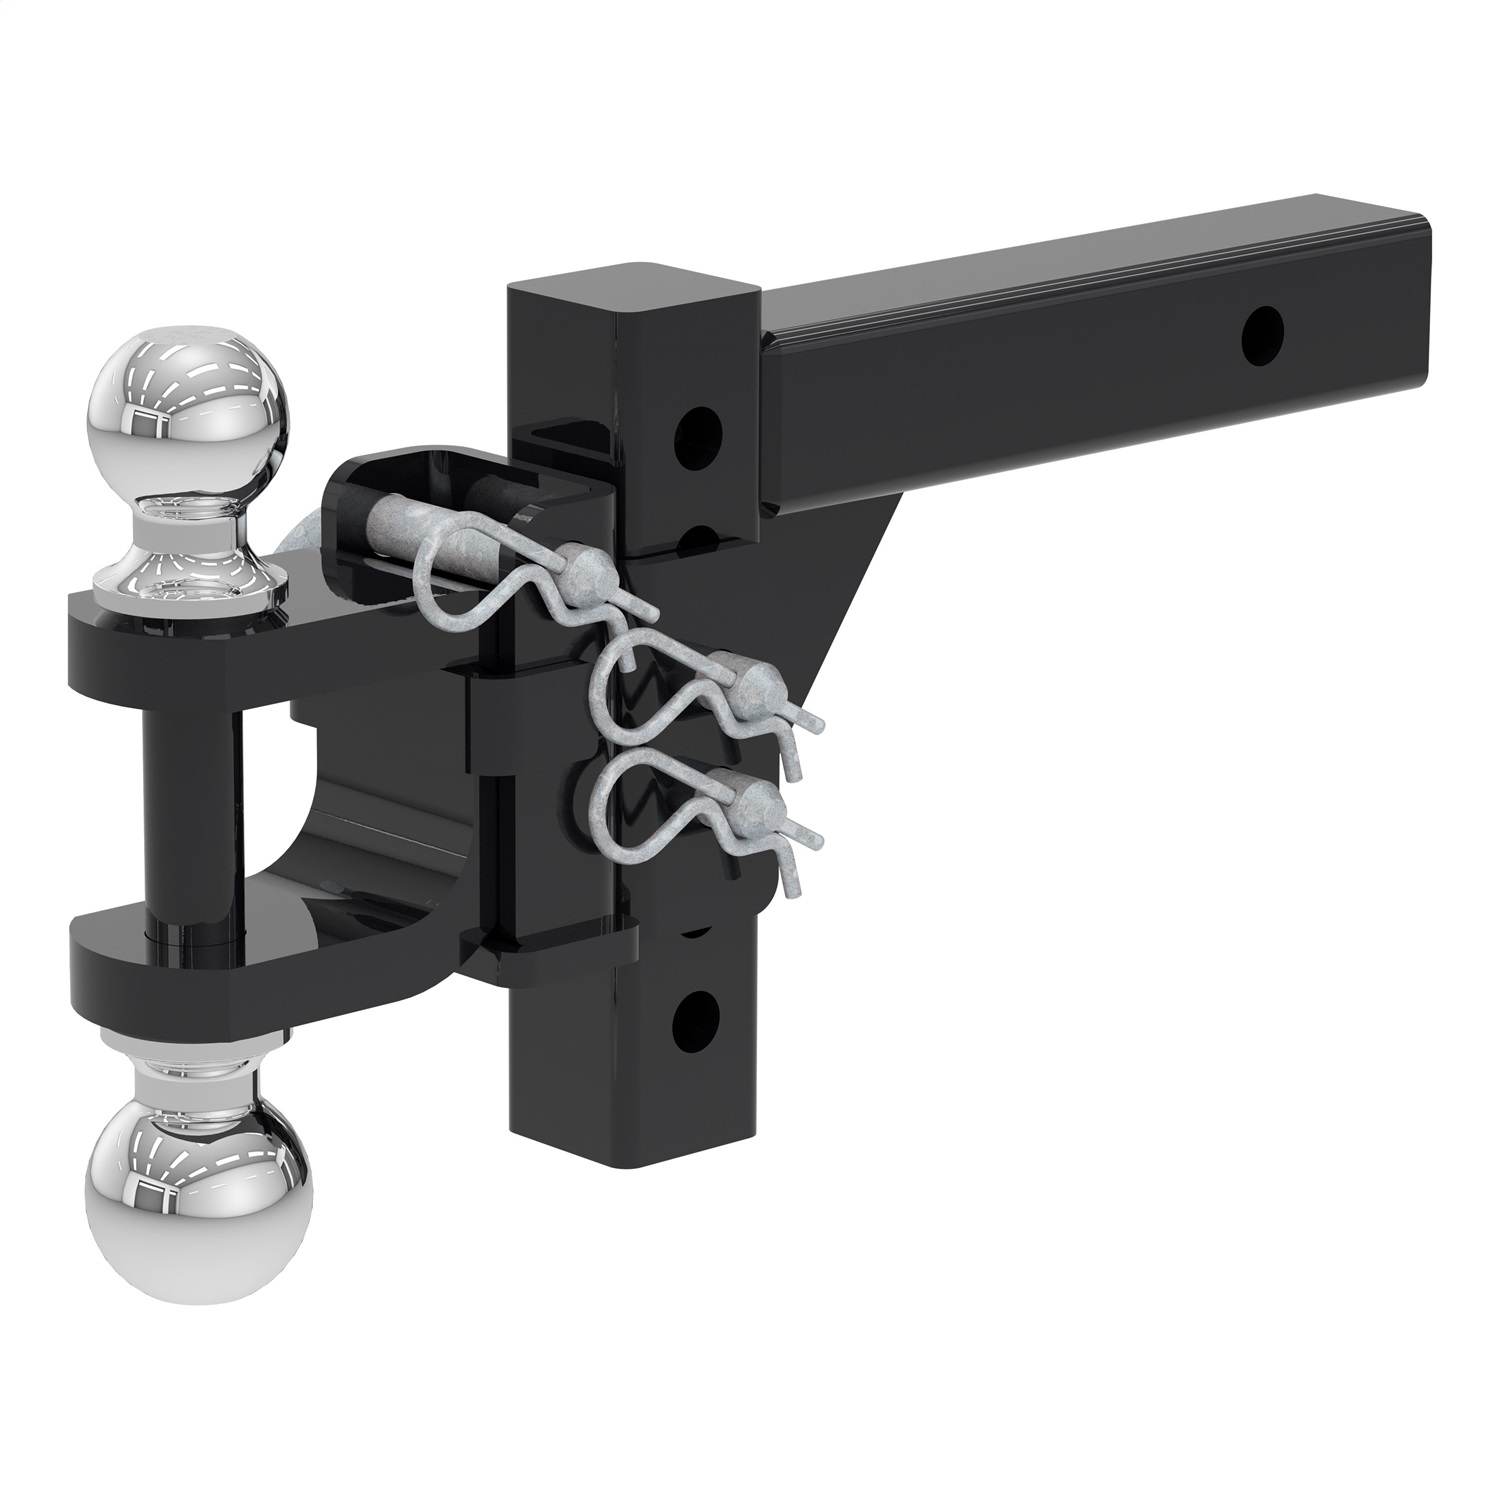 CURT Manufacturing CURT Manufacturing 45049 Adjustable Multi-Purpose Mount And Shank  Fits